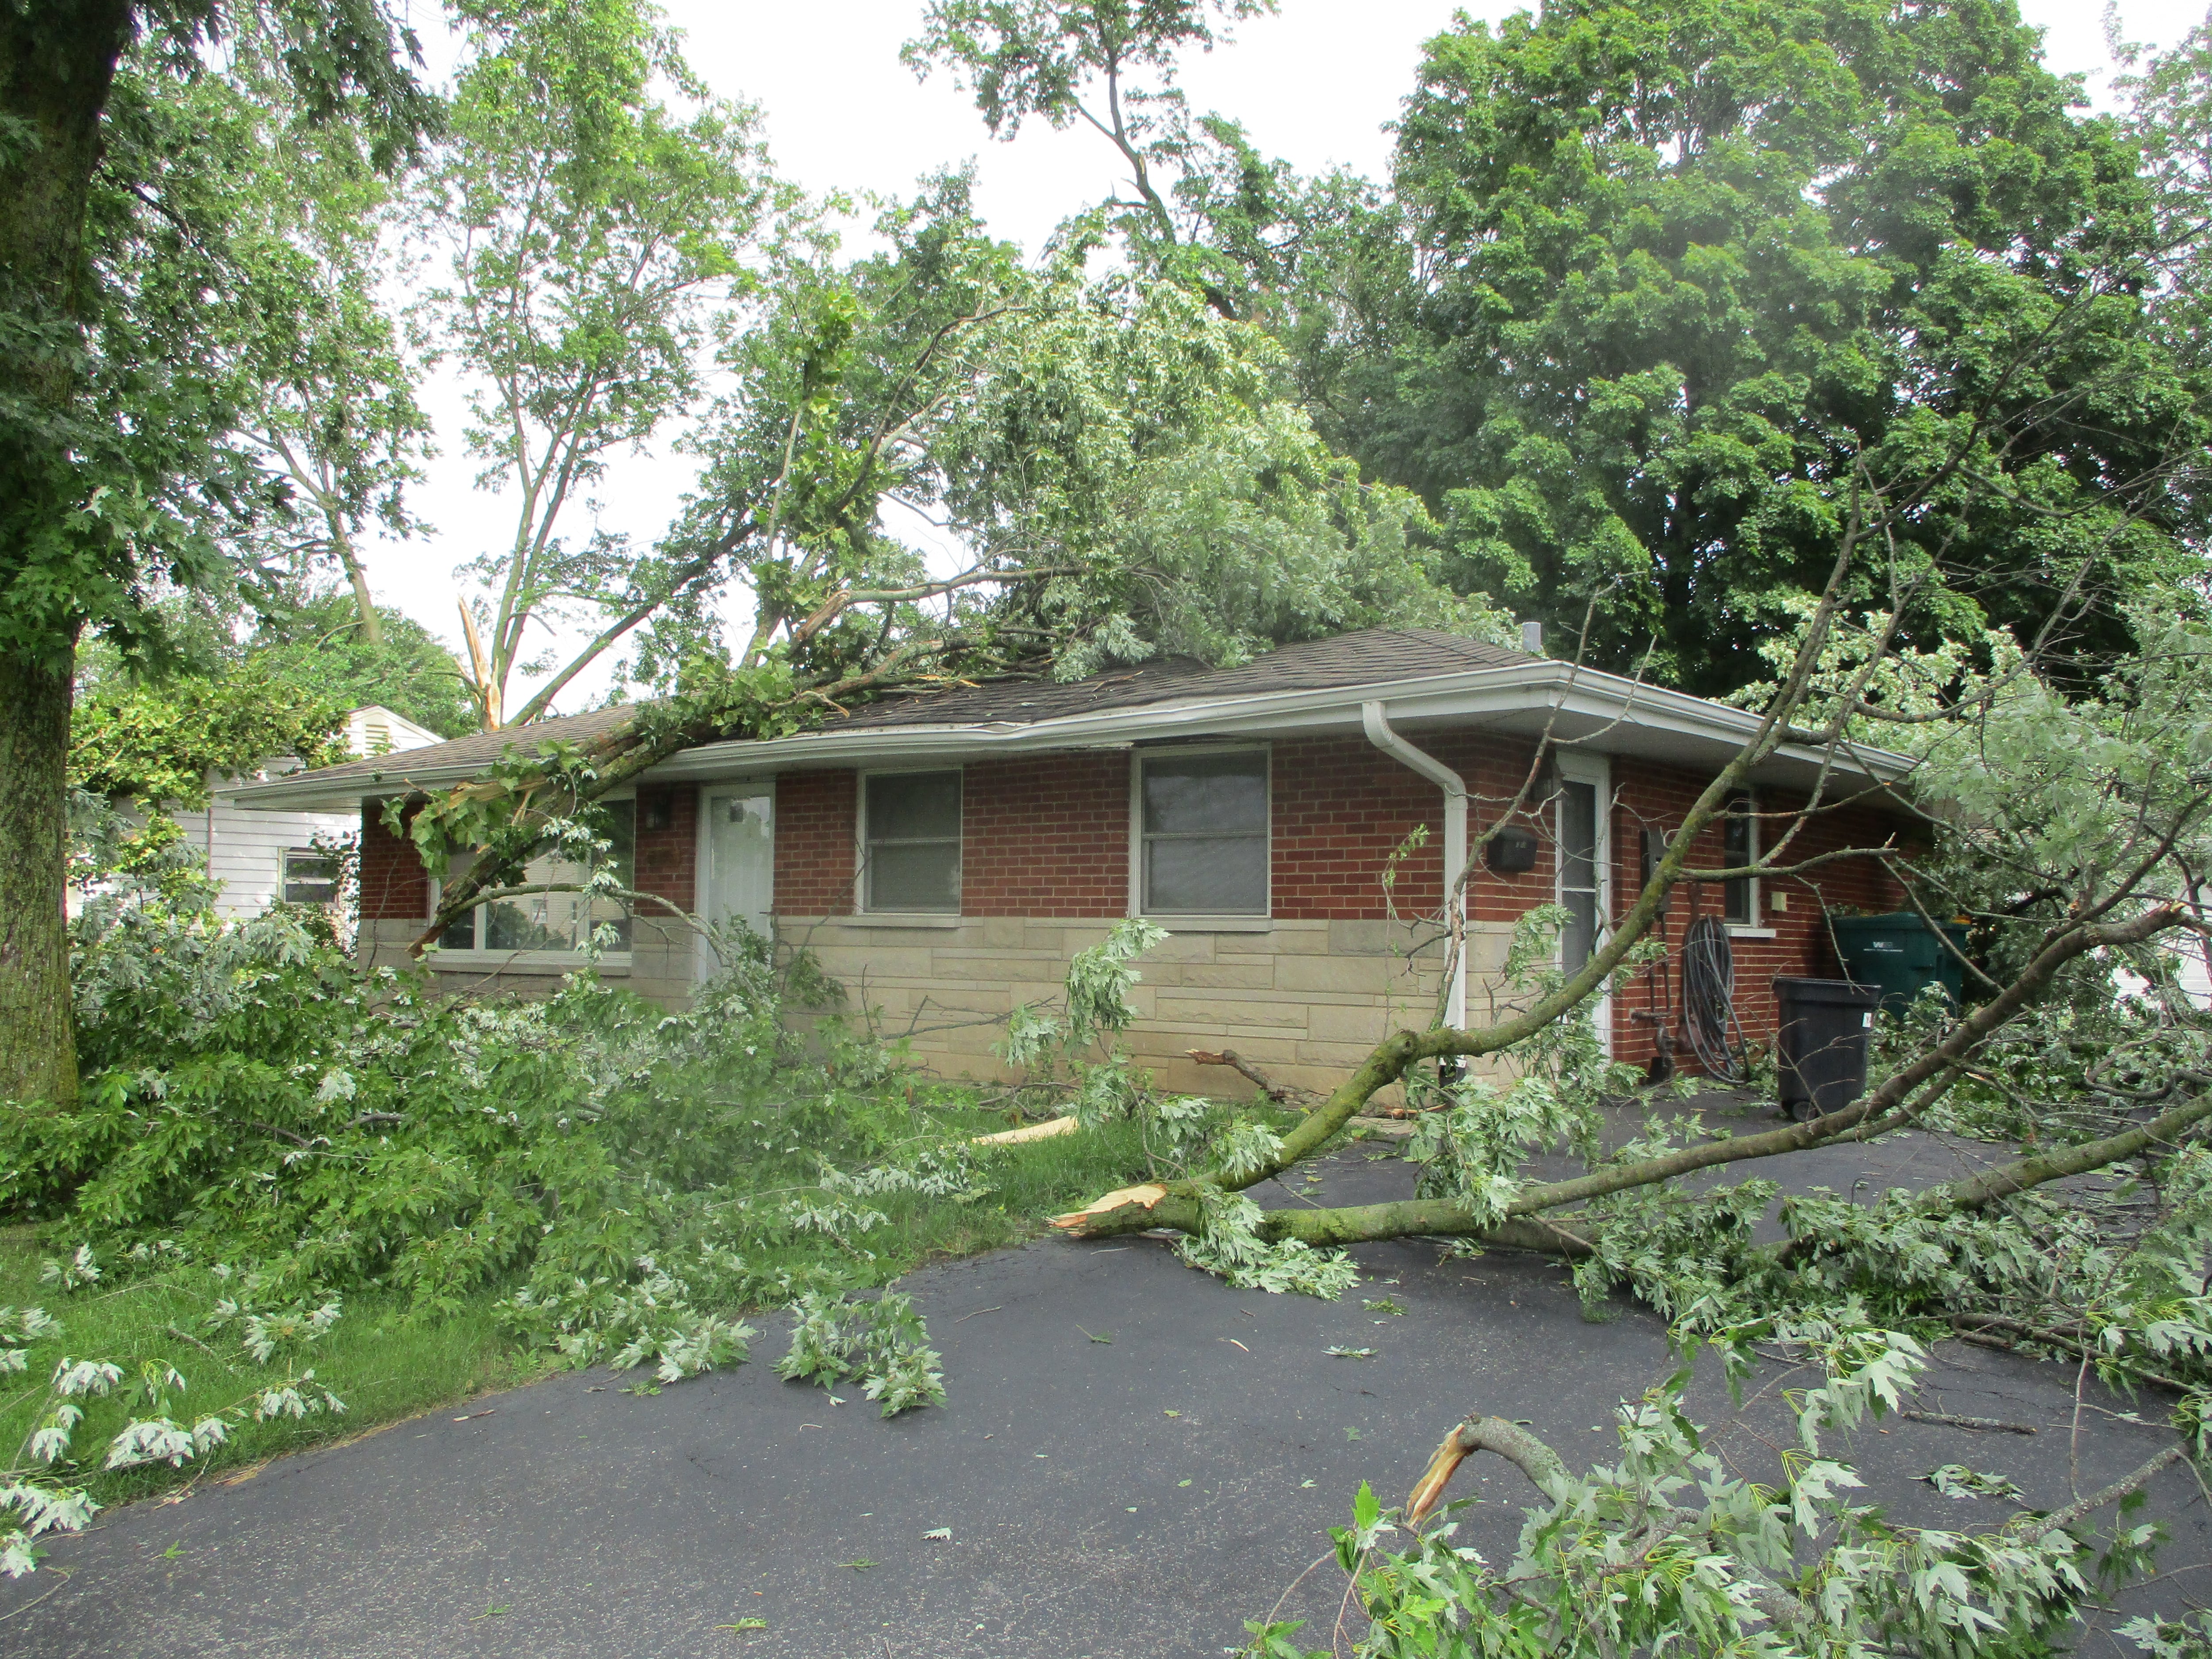 Joliet advising residents on contractors for storm repairs, warning of scams